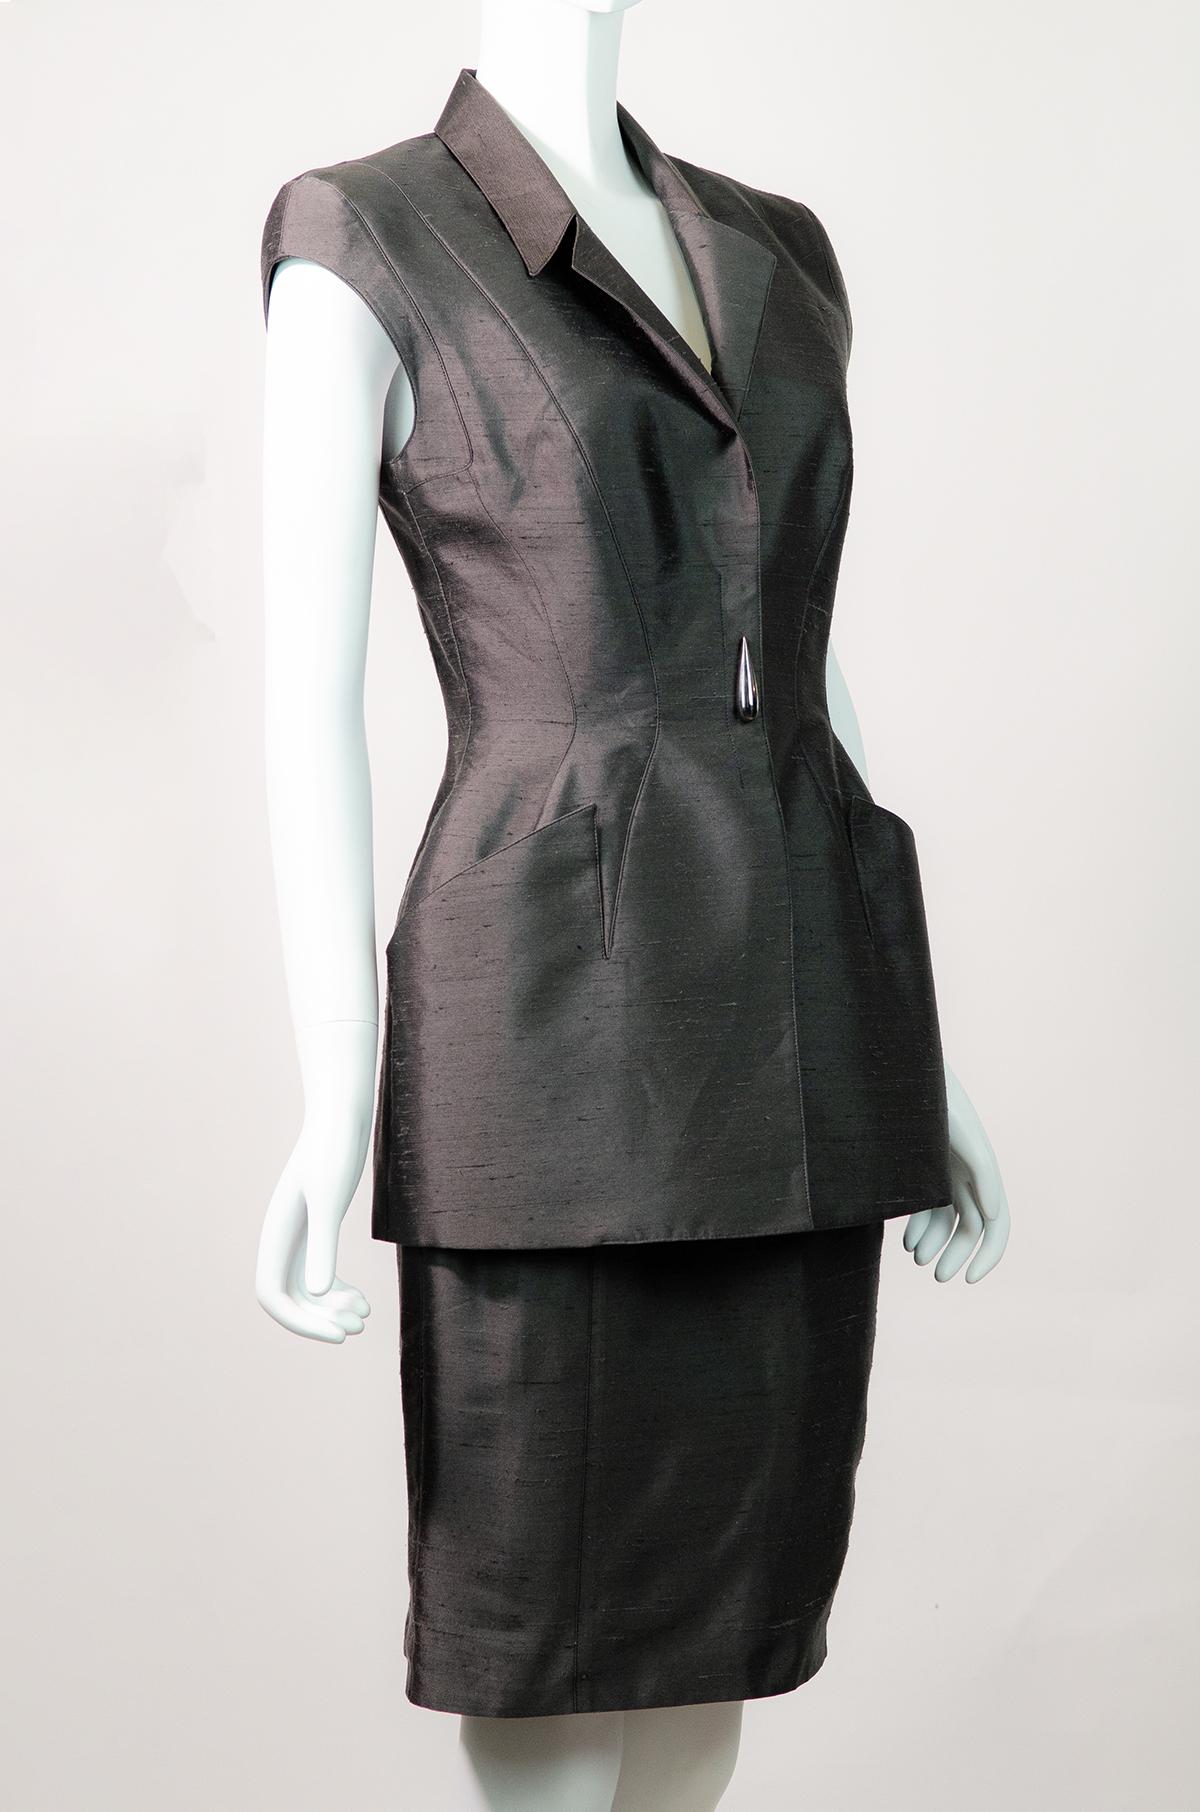 Women's THIERRY MUGLER 1998 Textured Silk Skirt Suit Grey Futuristic Style For Sale